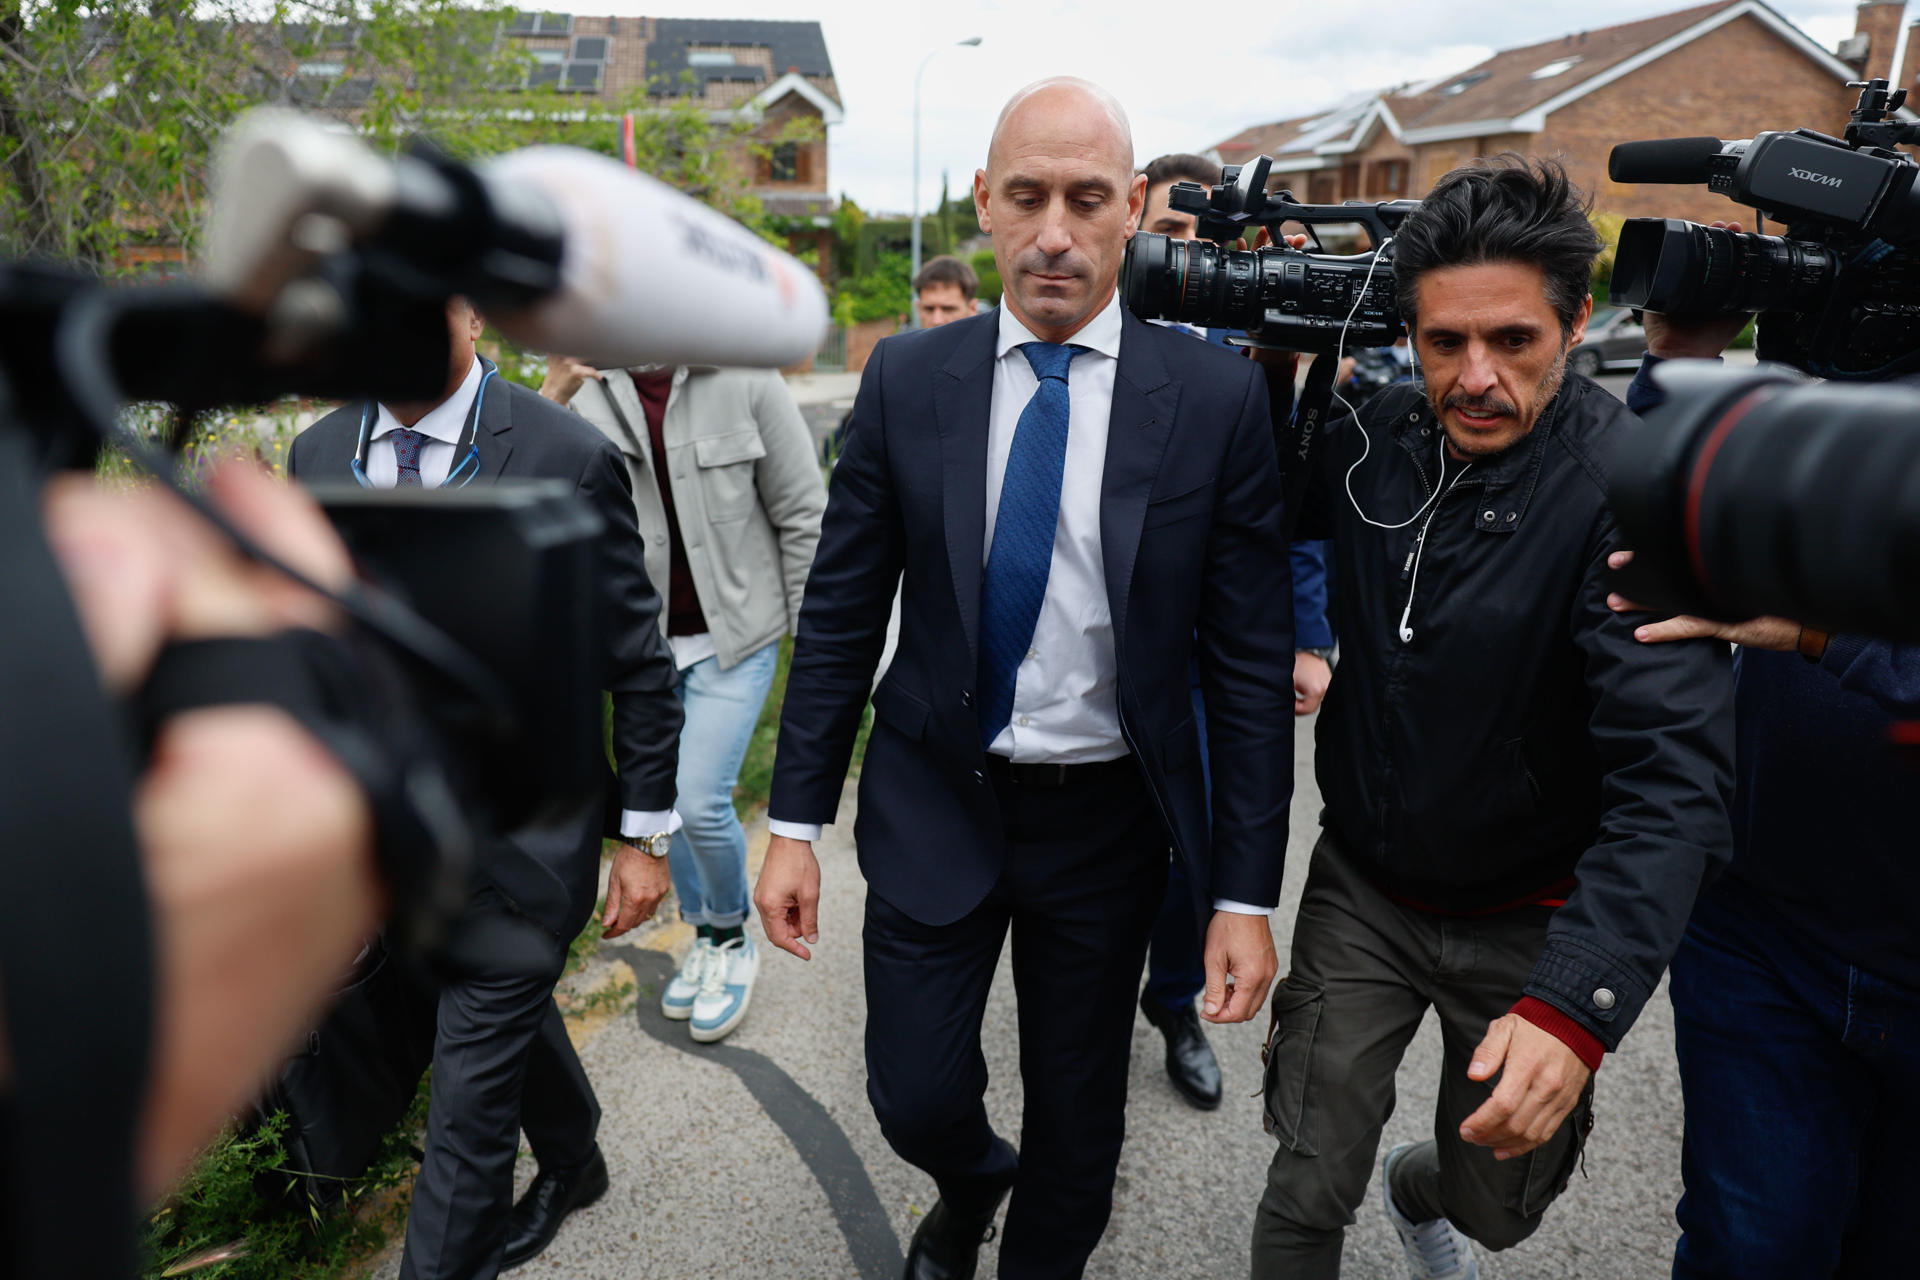 luis-rubiales-will-have-to-ask-permission-from-the-spanish-justice-system-to-be-able-to-leave-the-country